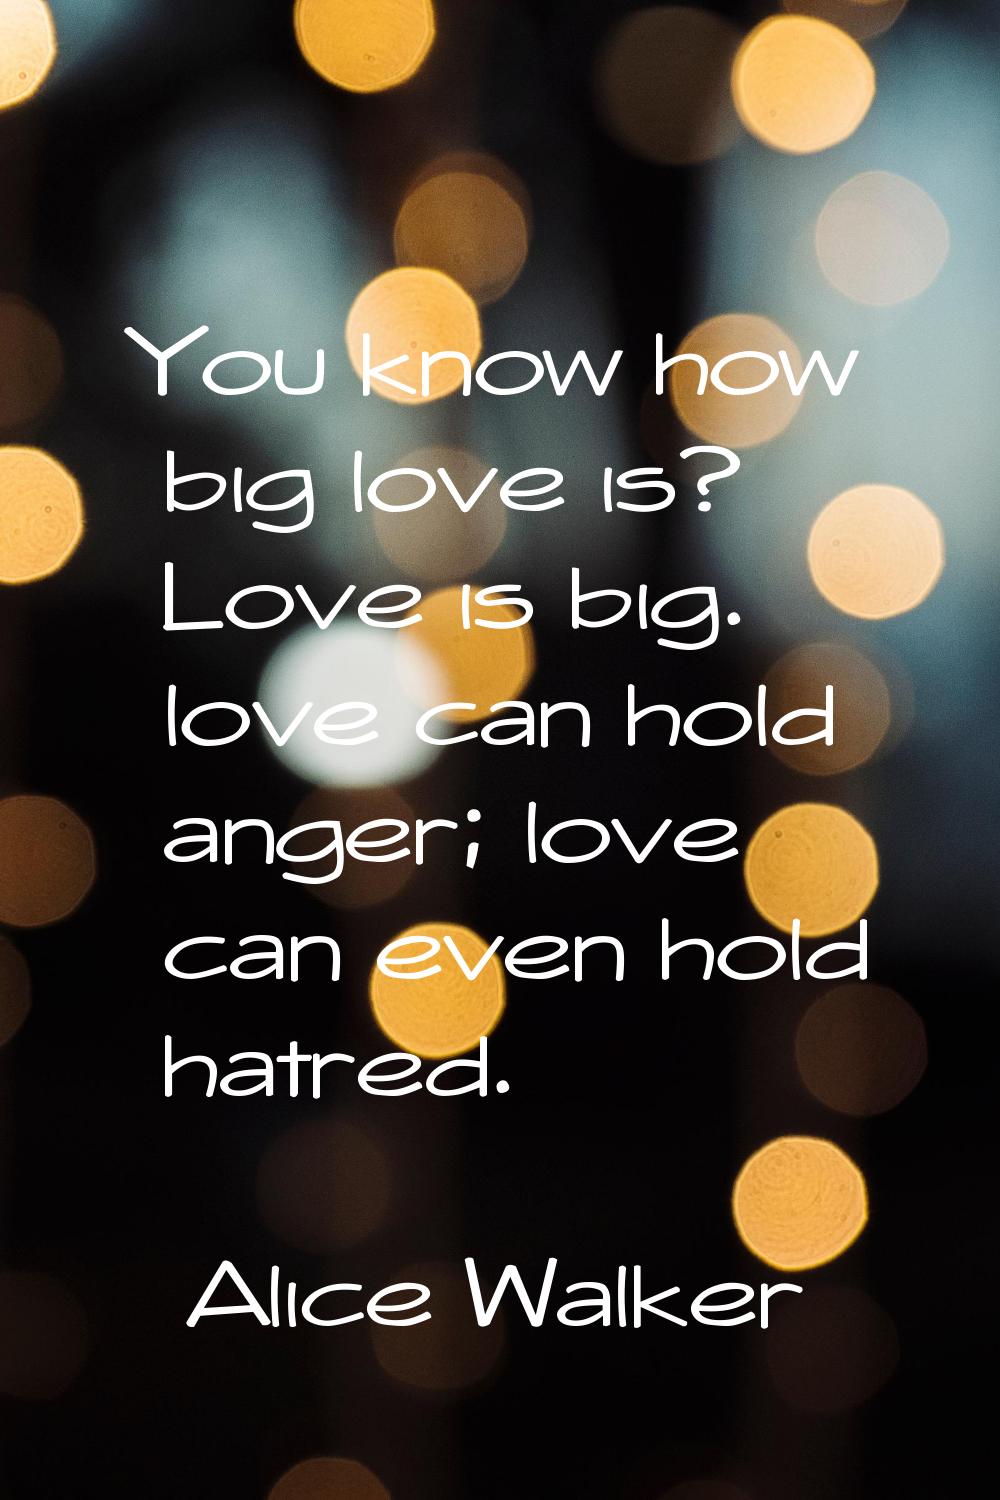 You know how big love is? Love is big. love can hold anger; love can even hold hatred.